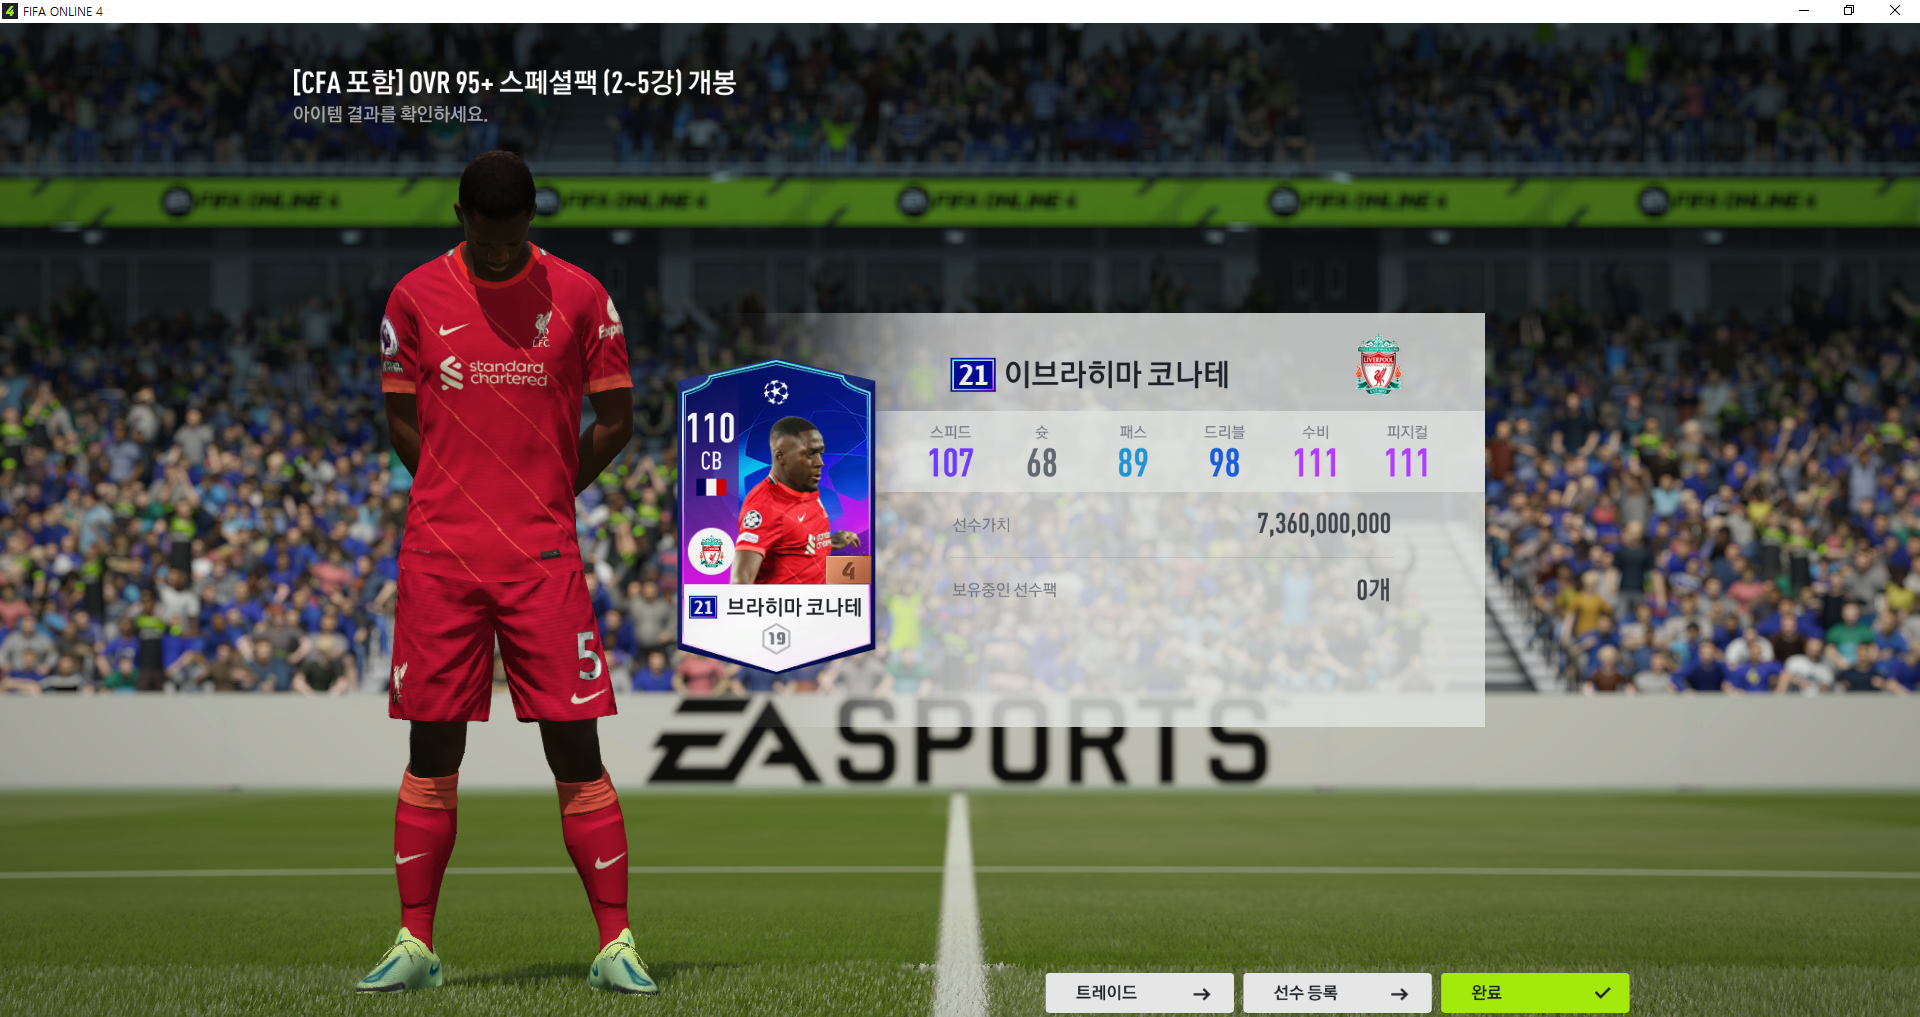 FIFA ONLINE 4 2022-06-23 오후 2_27_23.png